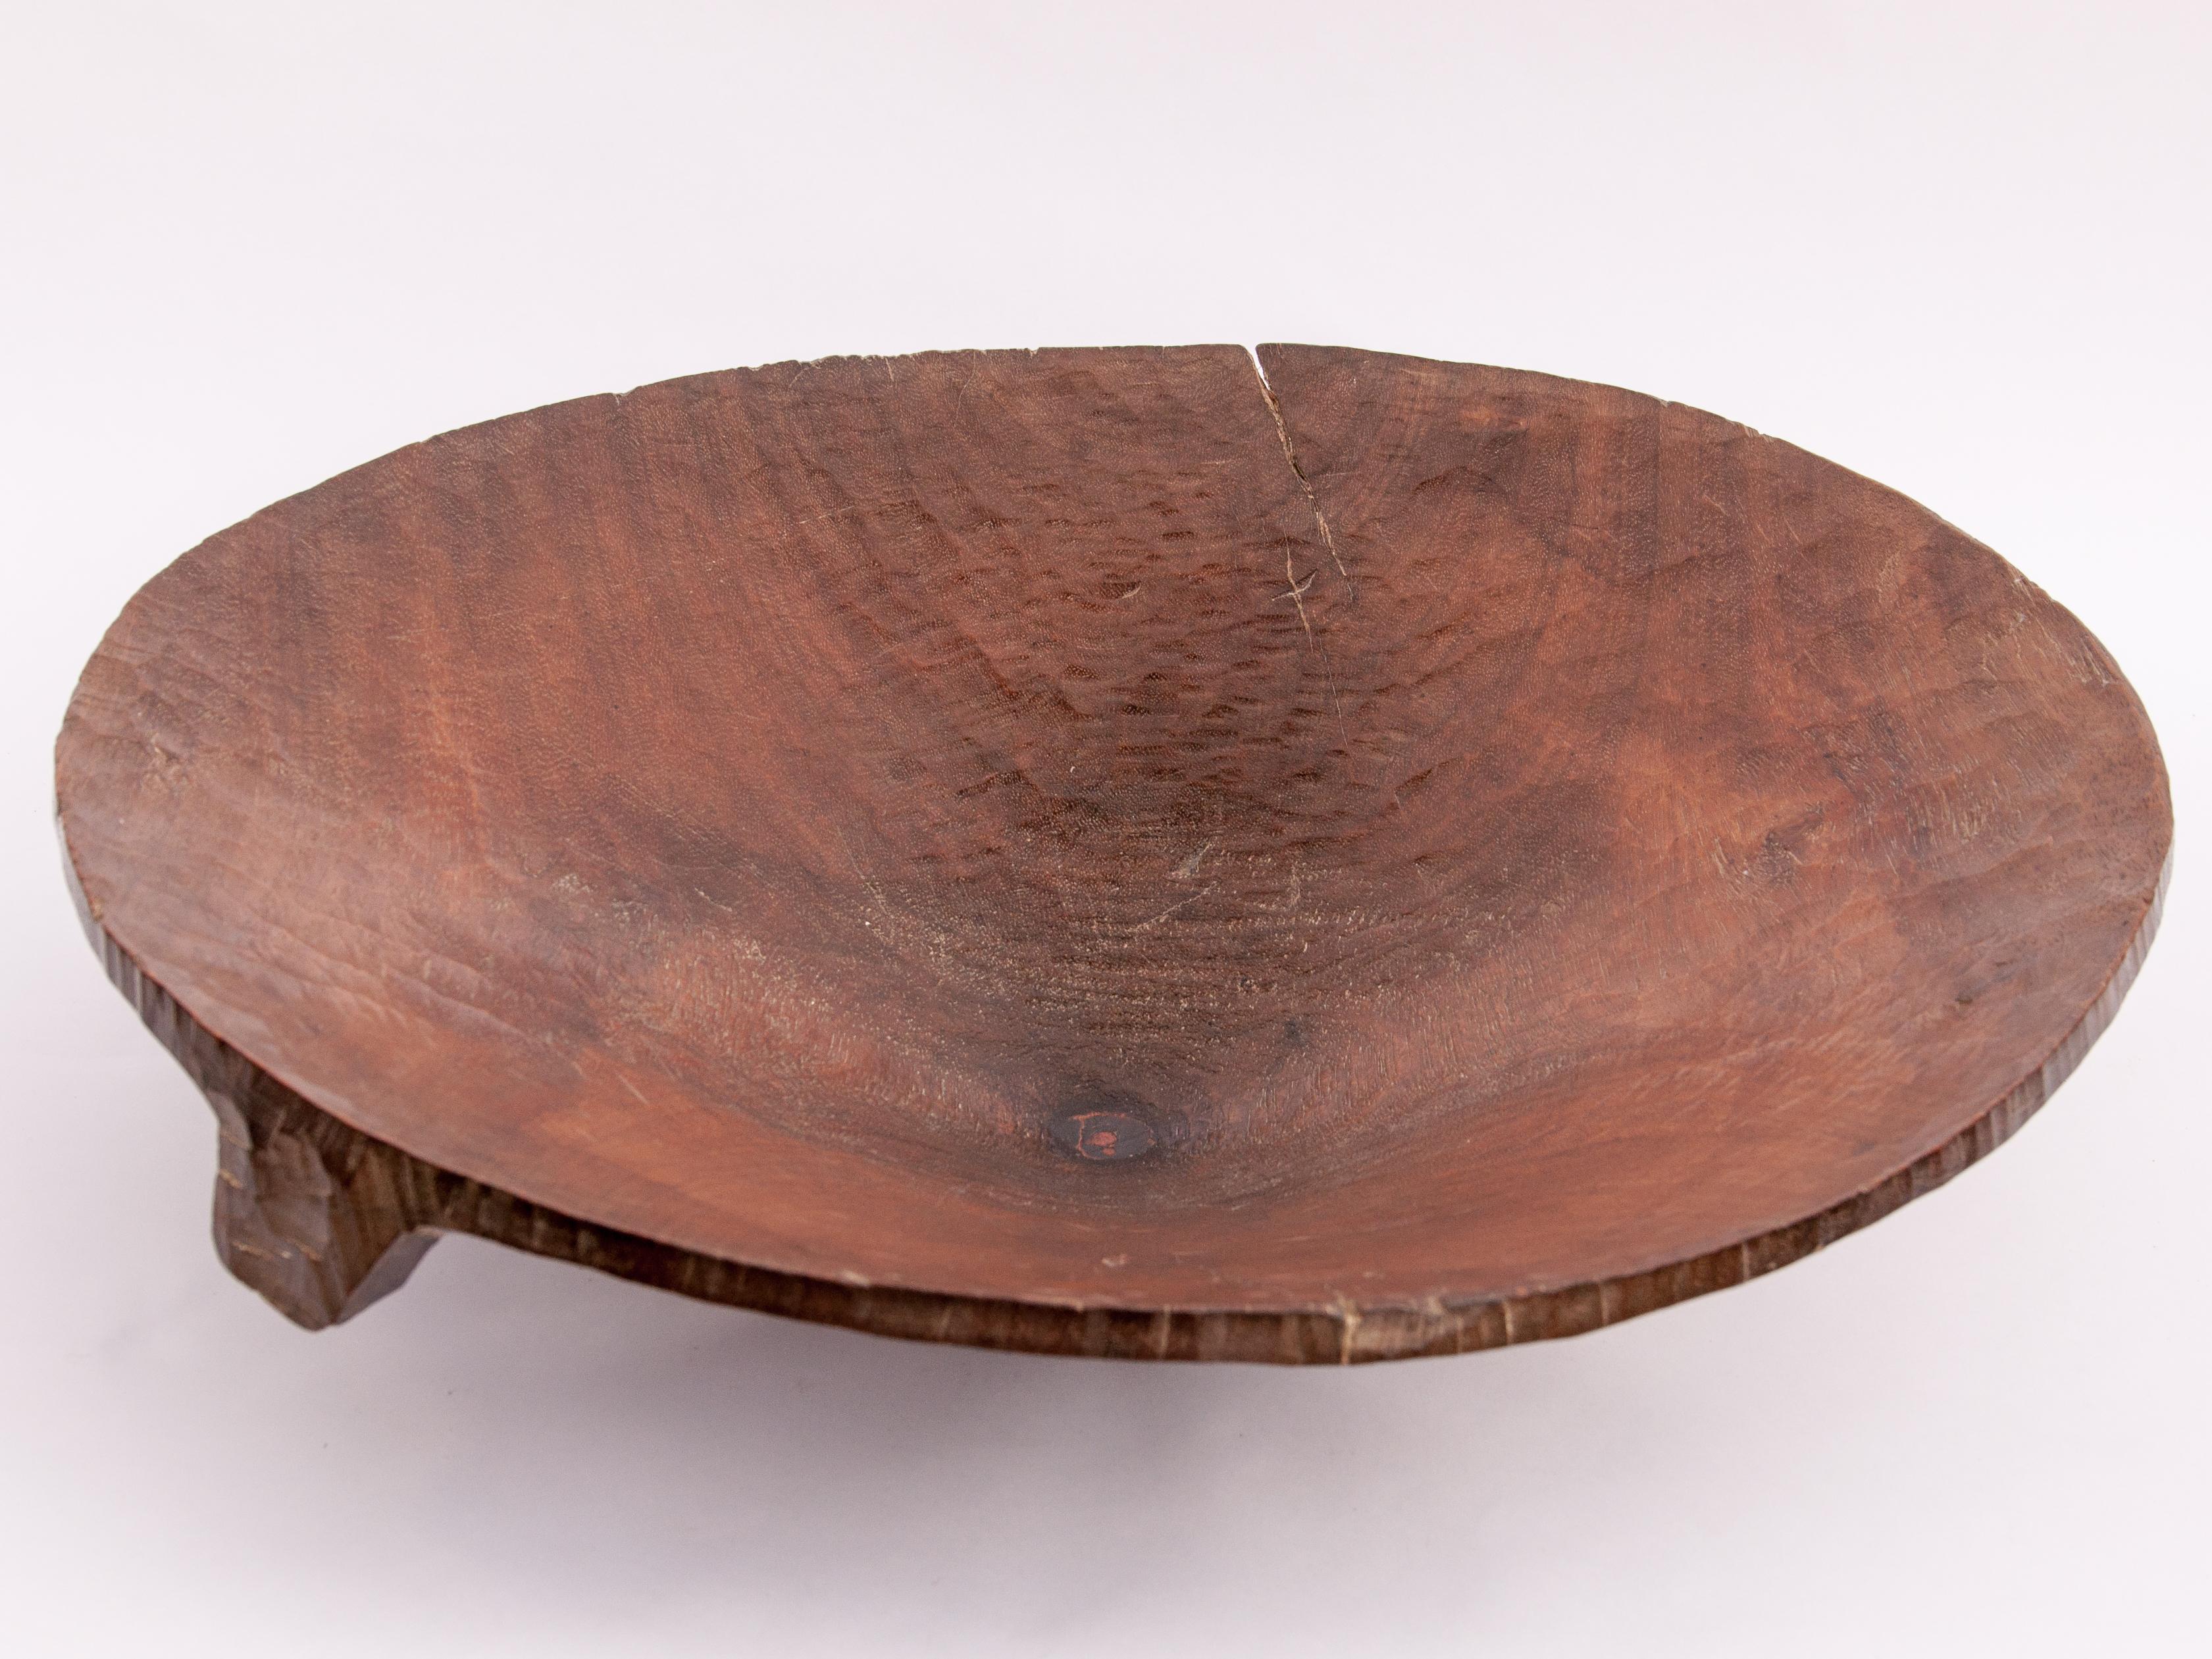 Vintage gold panning tray / bowl with added wooden base for stability. 23 inch diameter by 7 inches tall from Northeast Thailand, mid-20th century.
This rustic tray was fashioned from a single piece of local hardwood and used to pan for gold in the